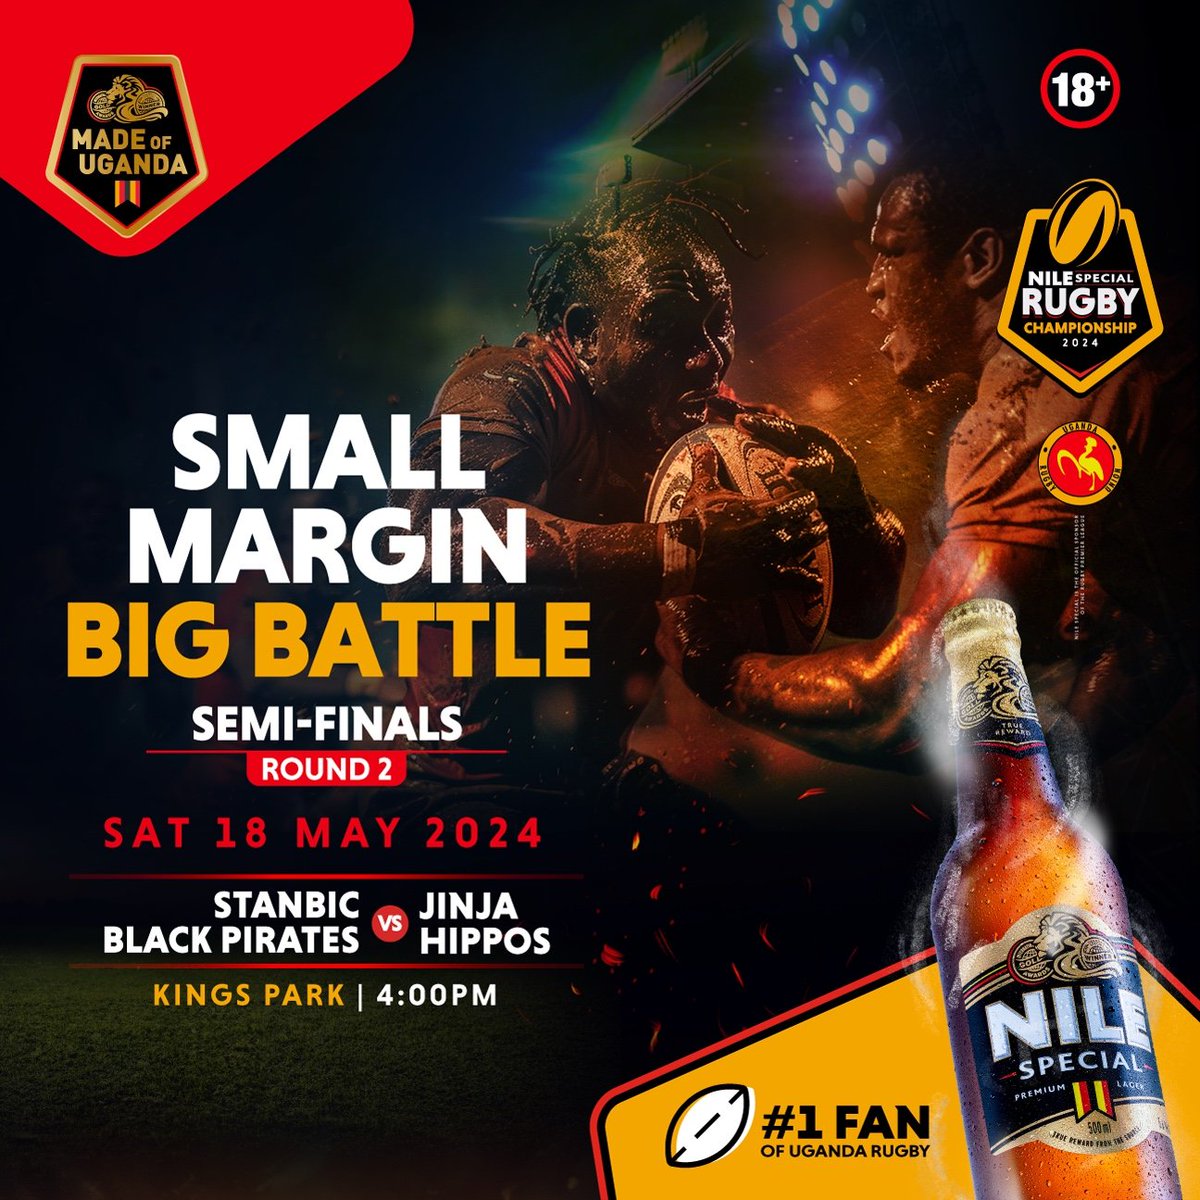 Stanbic Black Pirates host Jinja Hippos for Round 2 of the #NSRC Semi Finals where they seek to bridge the one point gap to book themselves into the final. Will Hippos lower their guard away from home? #RaiseYourGame #GutsGritGold #NSRCSemiFinals2024